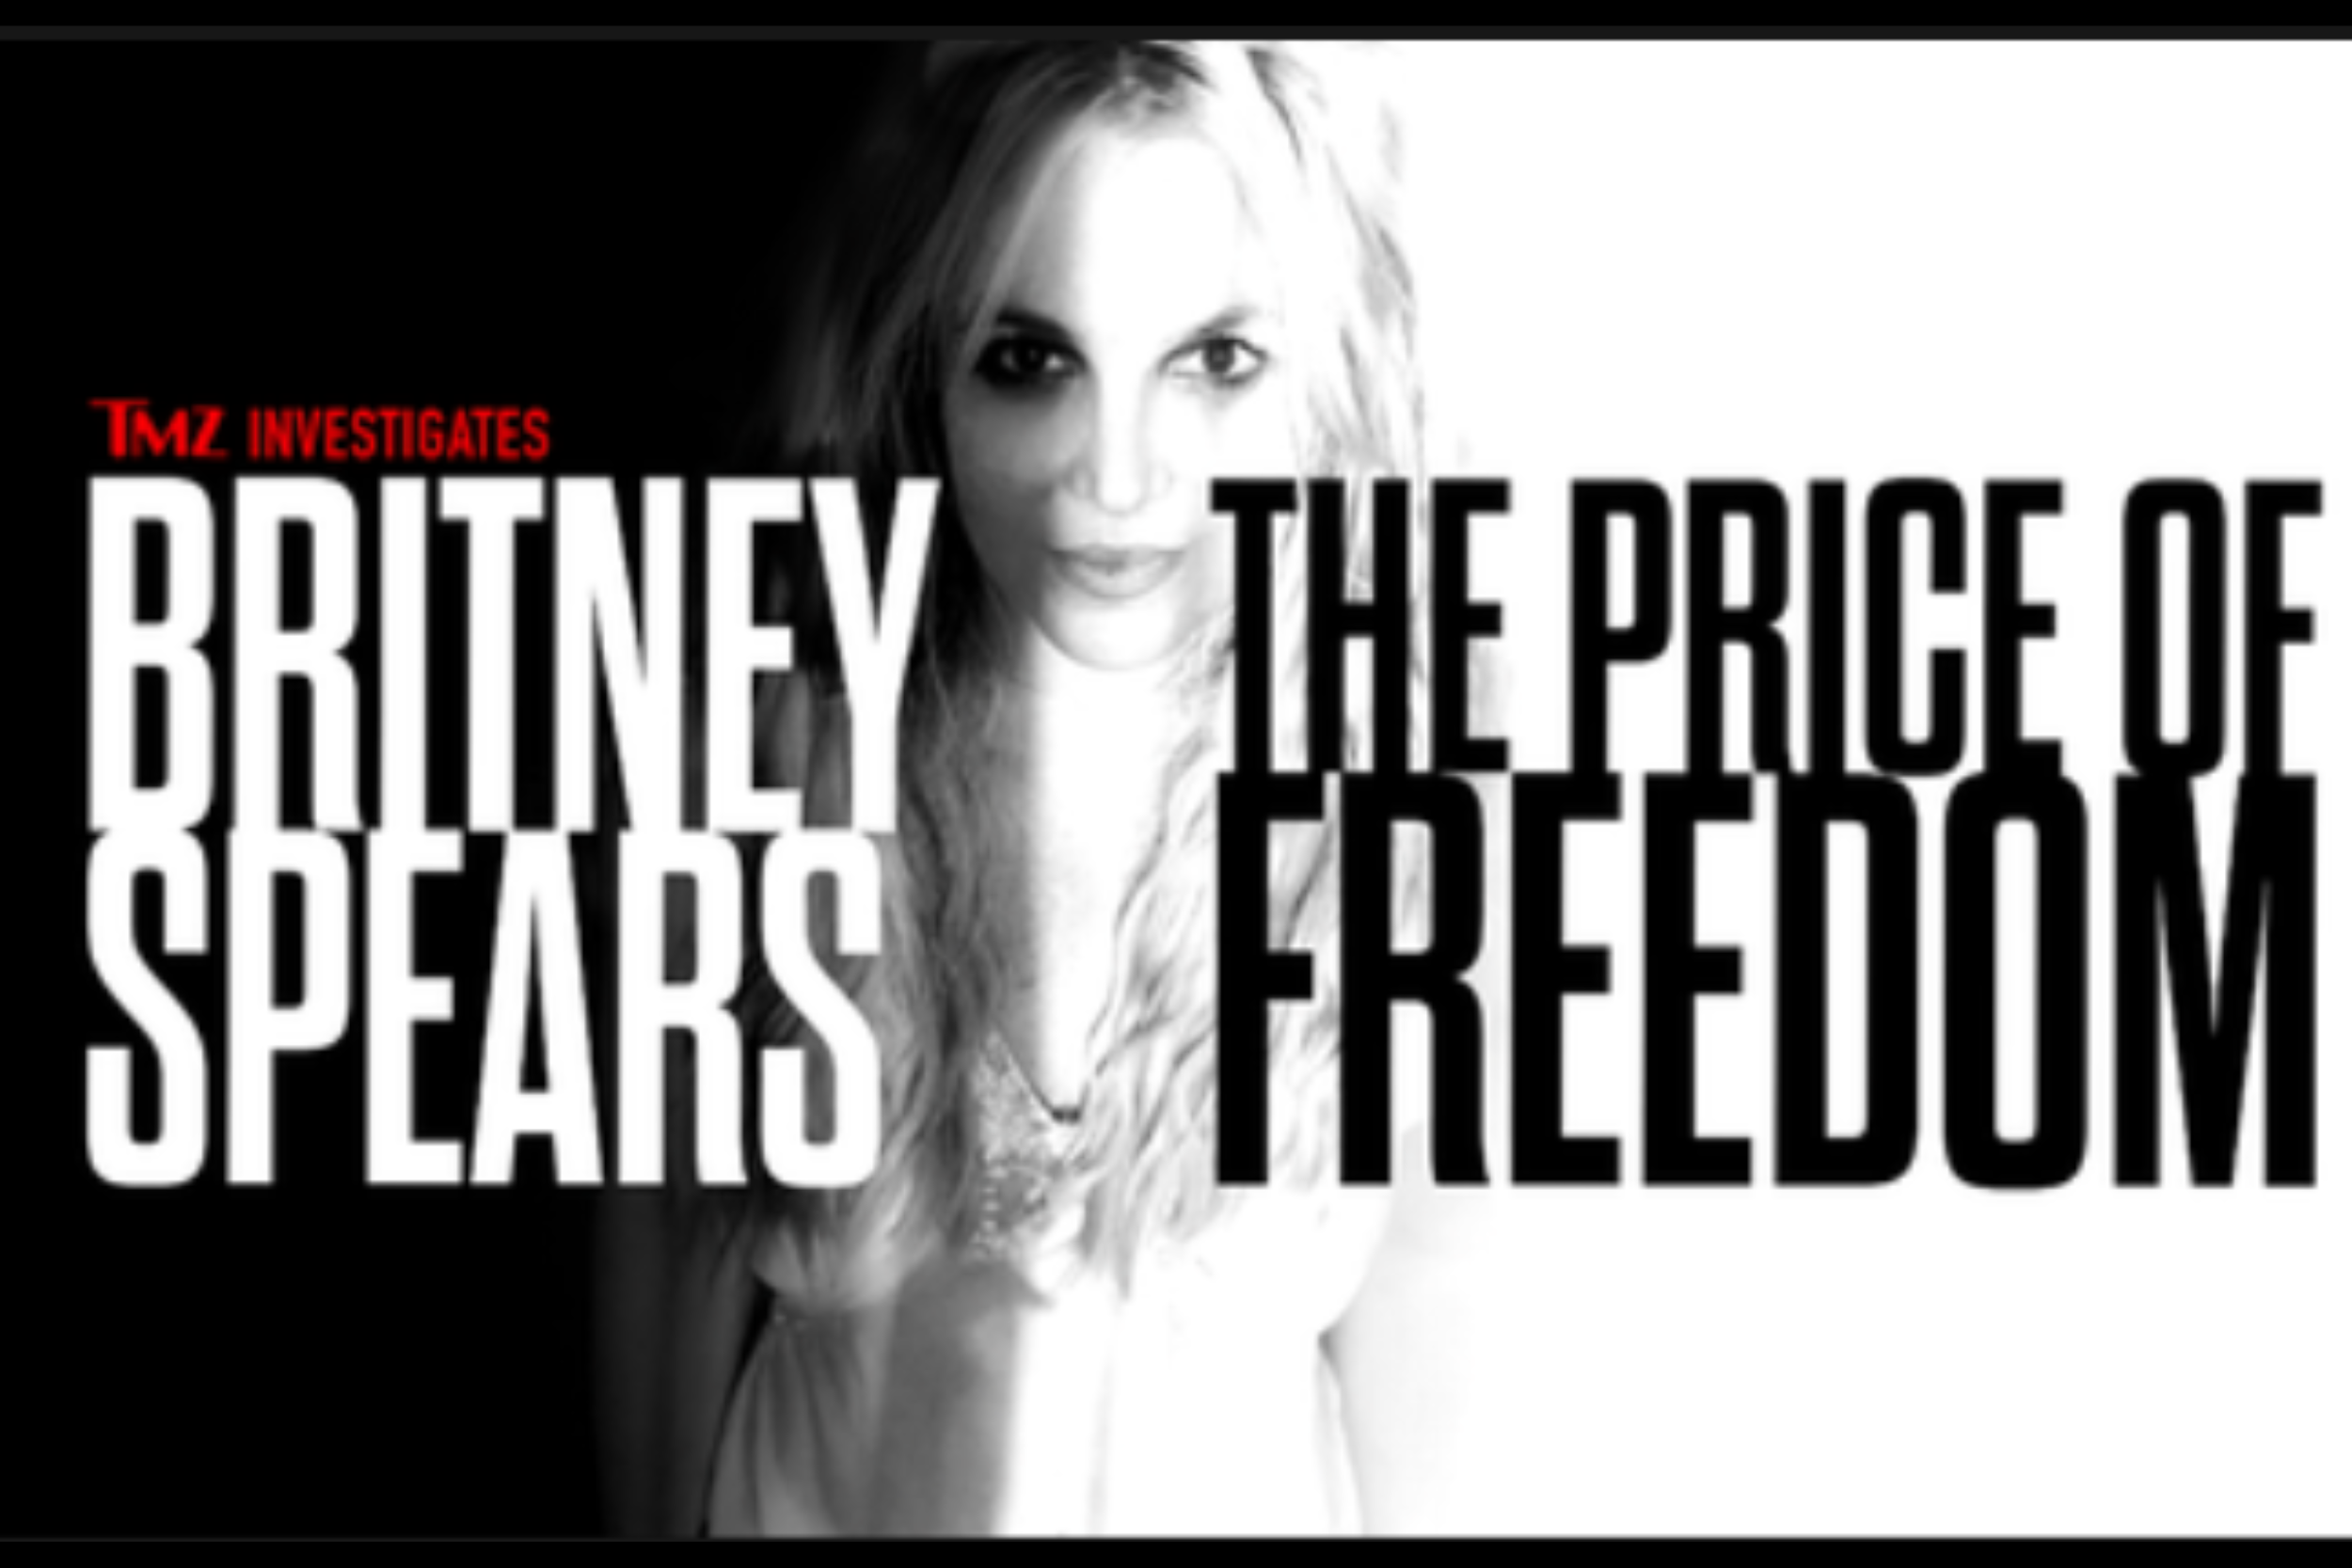 Britney Spears_The Price of Freedom - Brittany Hodak Interview